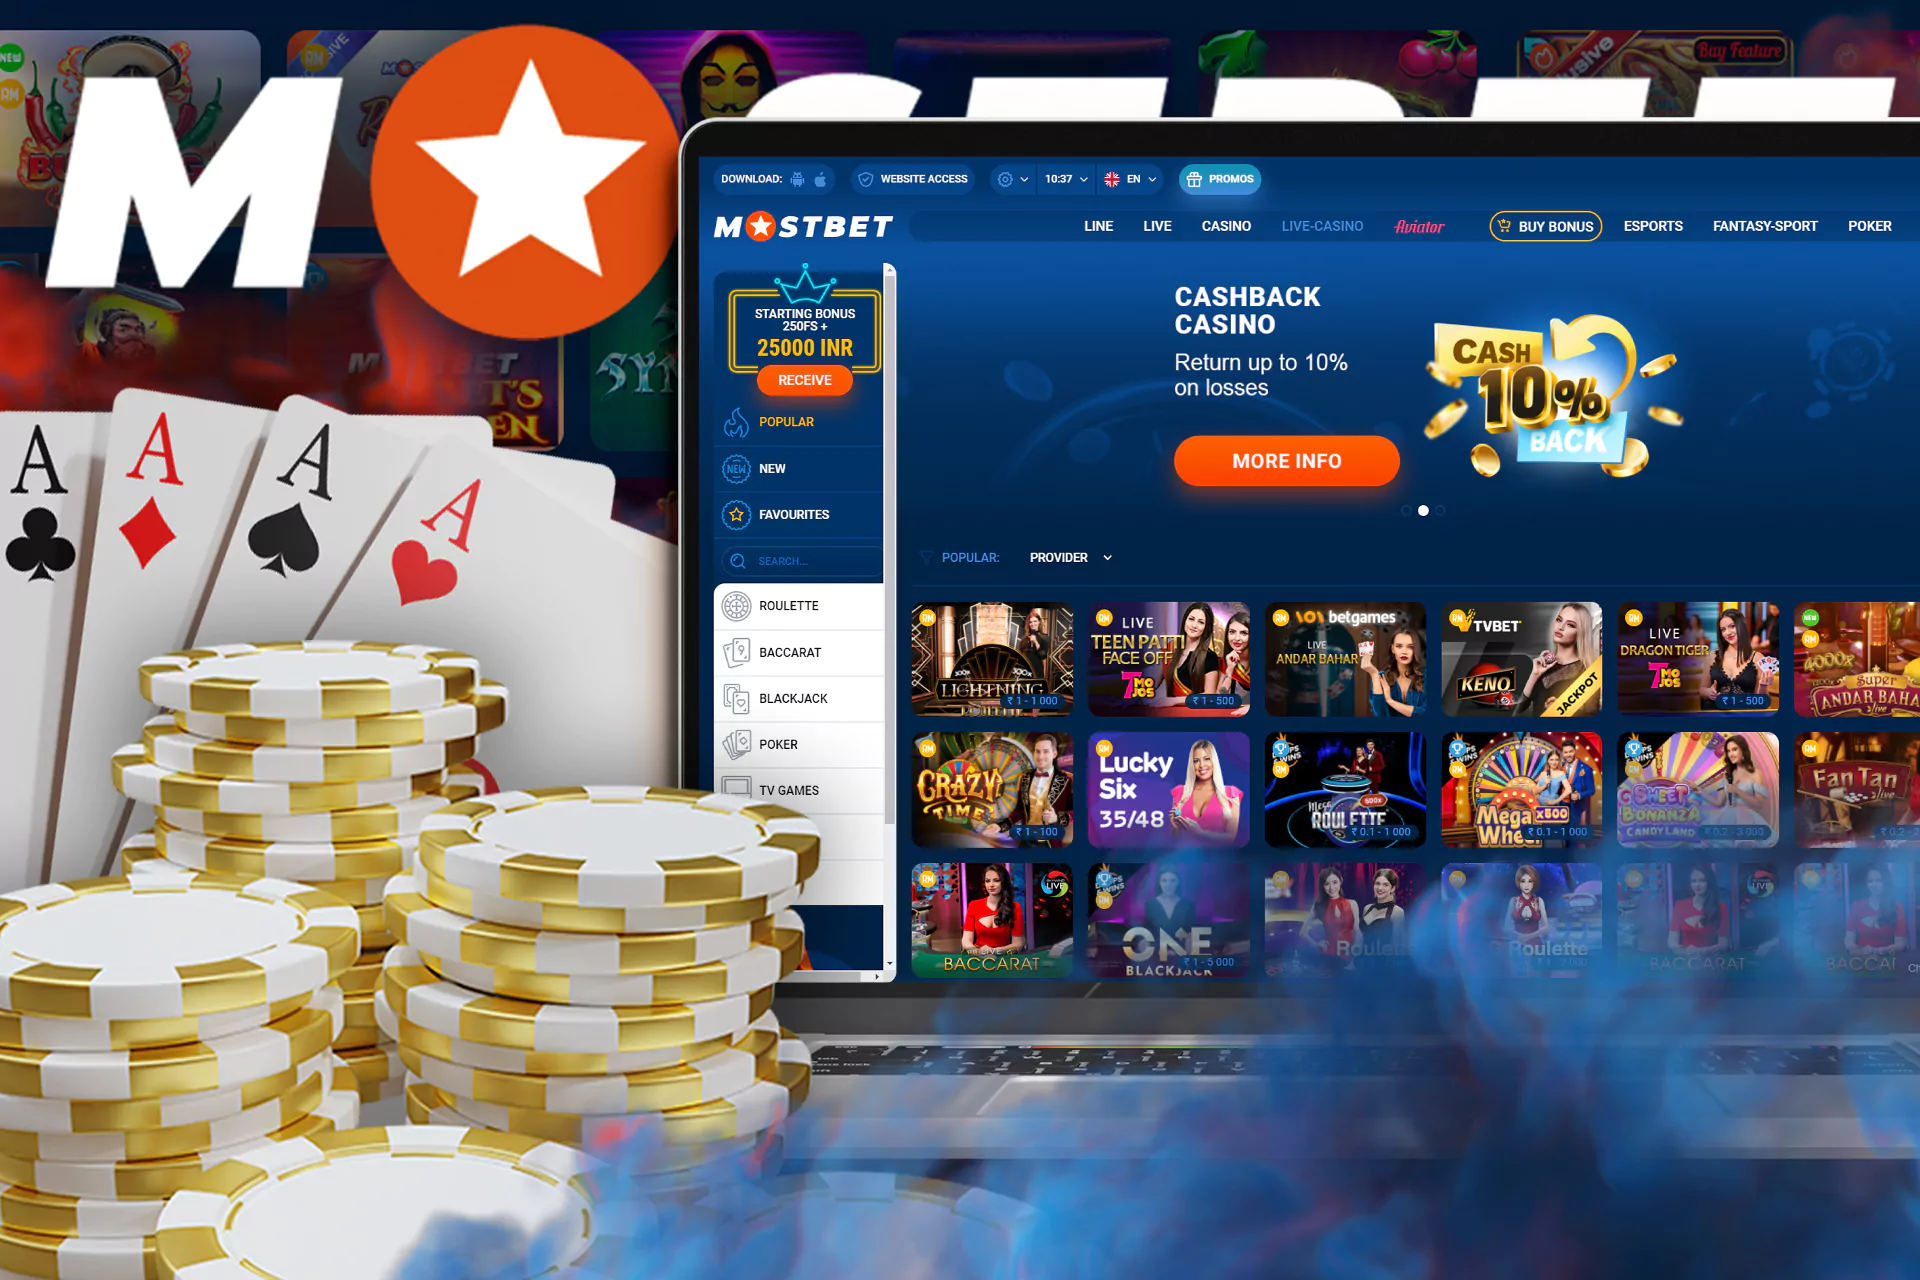 Besides slots, casino fans can play live games with real dealers.